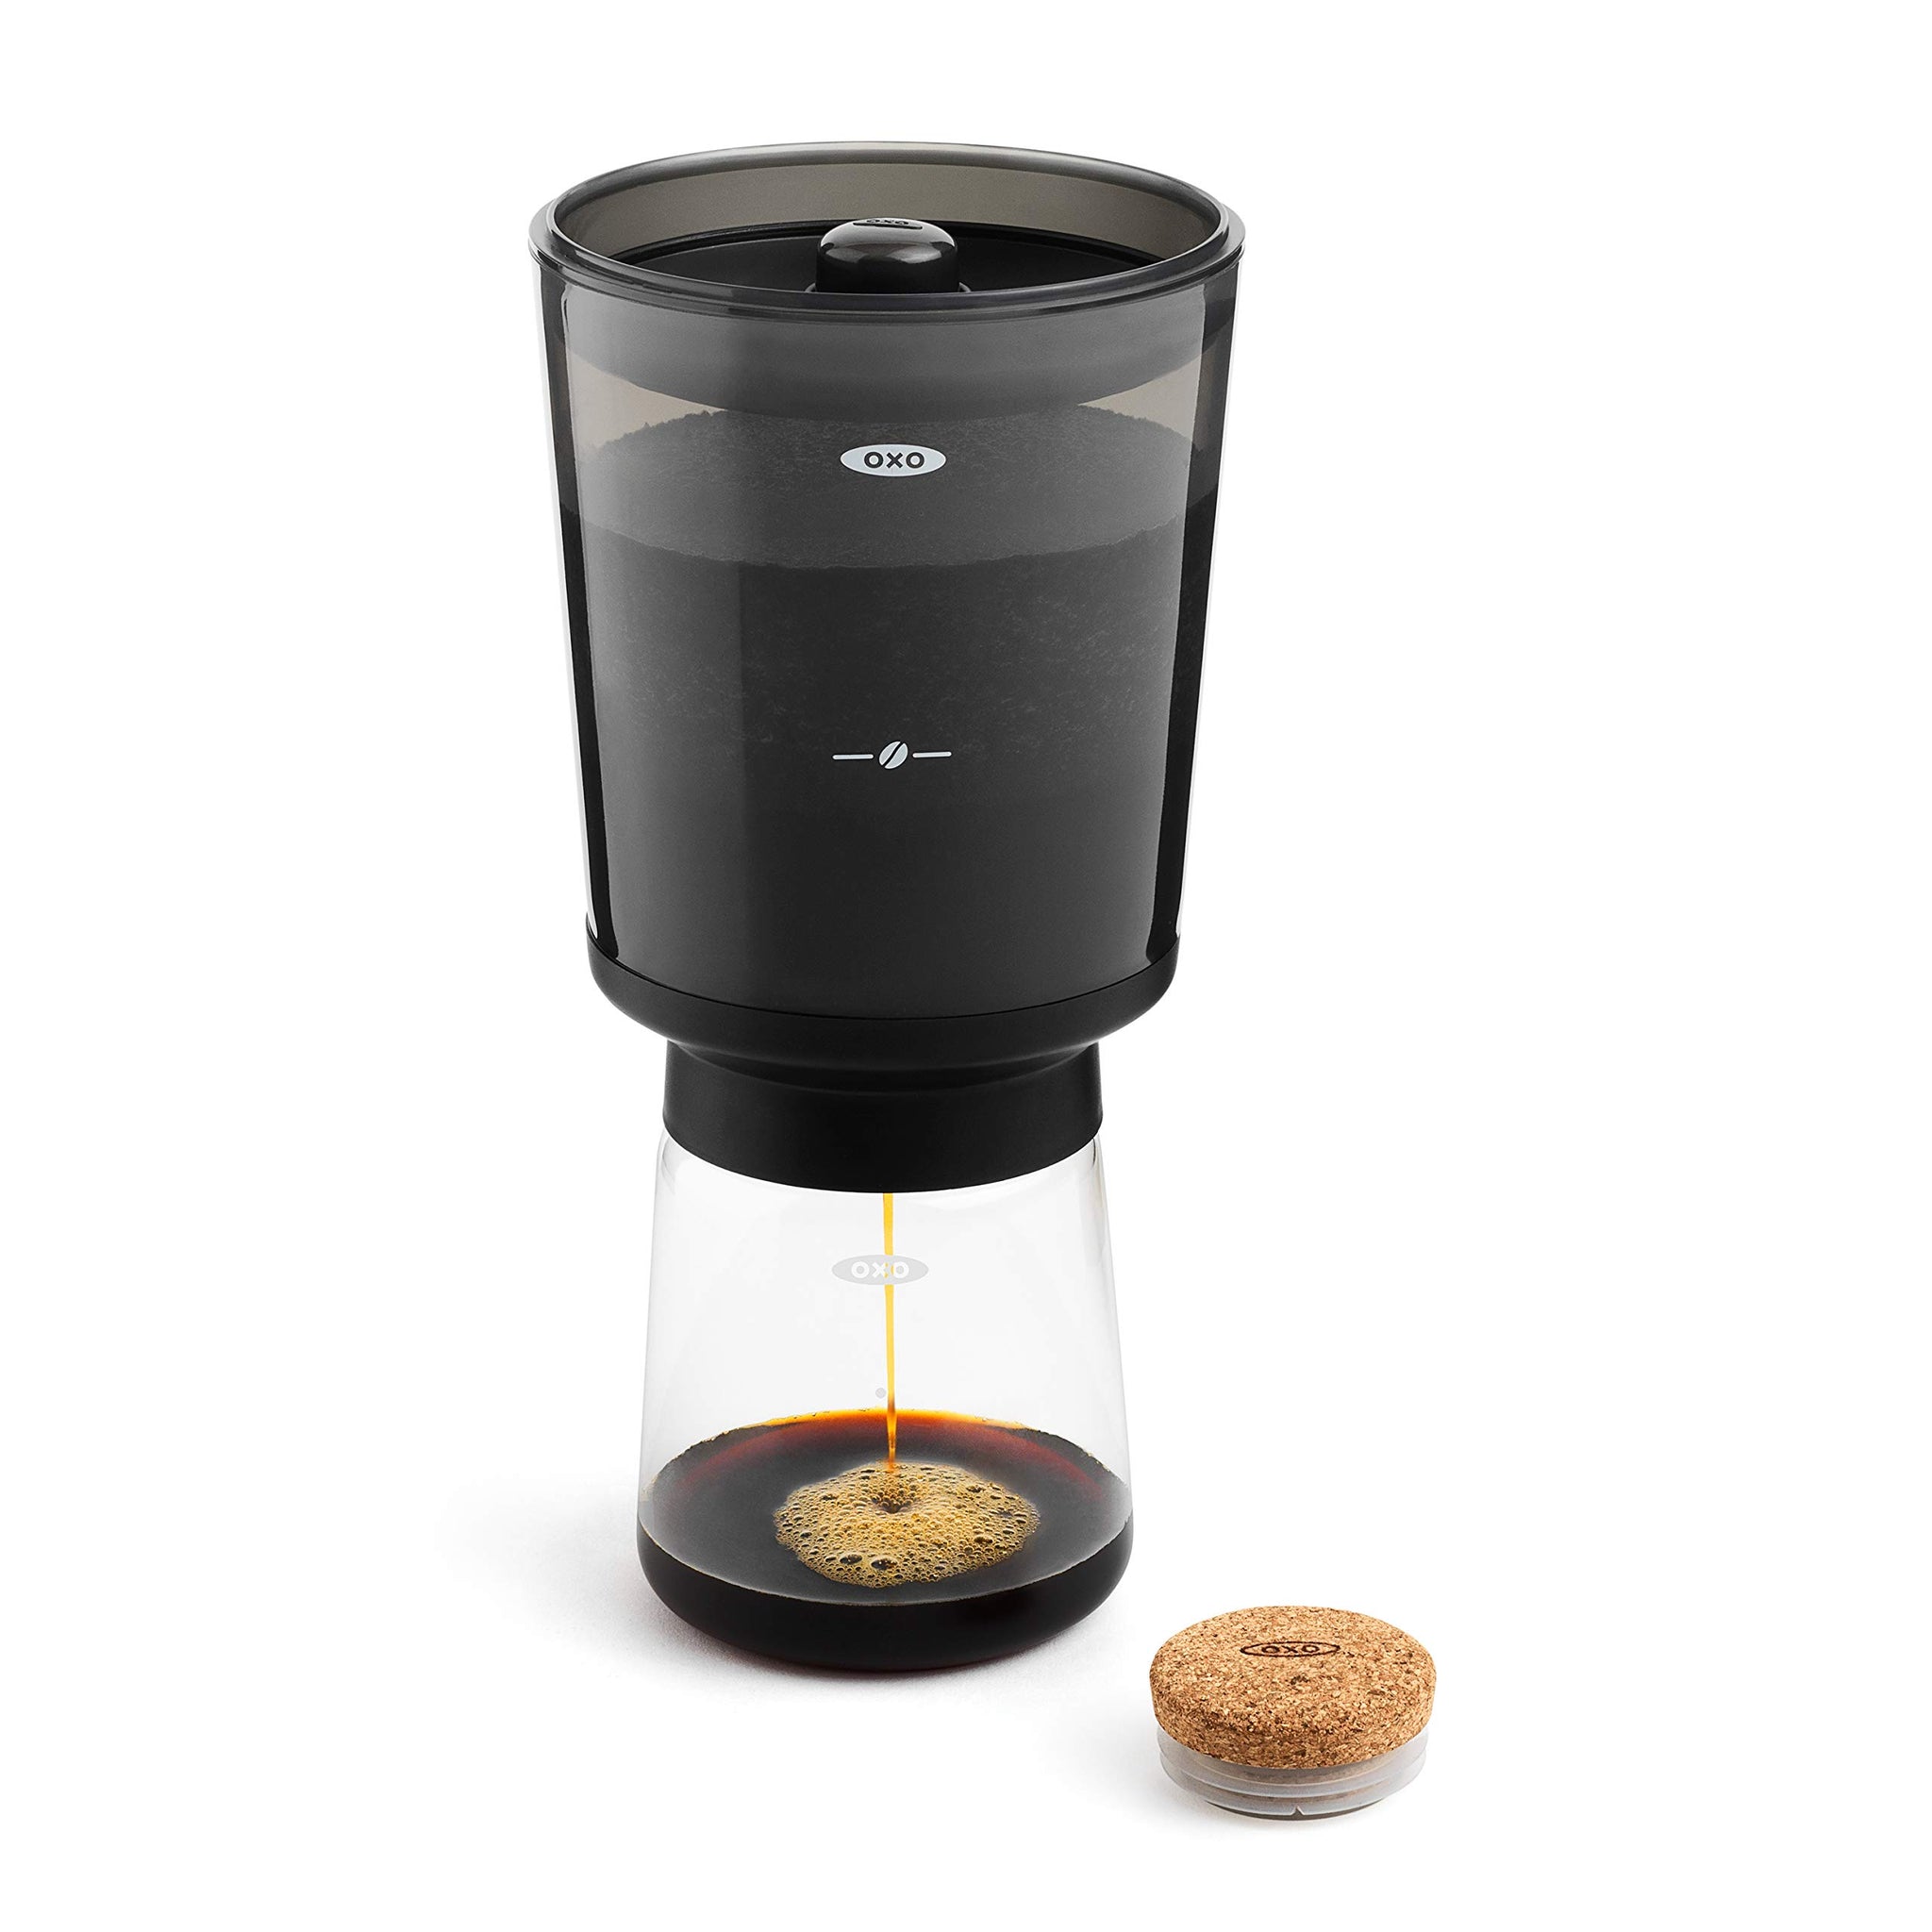 Cold Brew Coffee Maker & Conical Burr Coffee Grinder Bundle